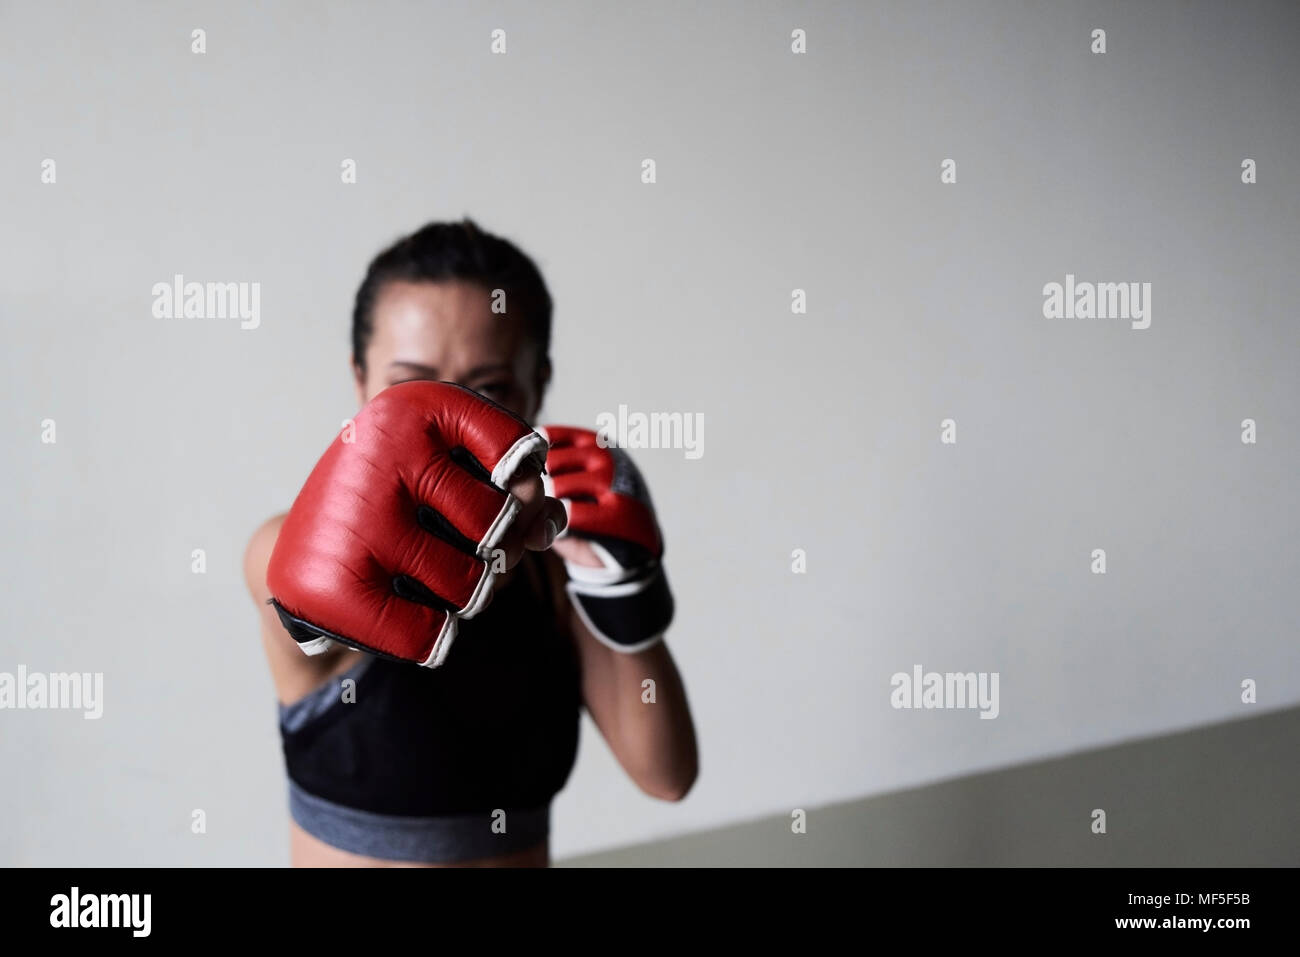 Boxing glove of a female boxer exercising Stock Photo